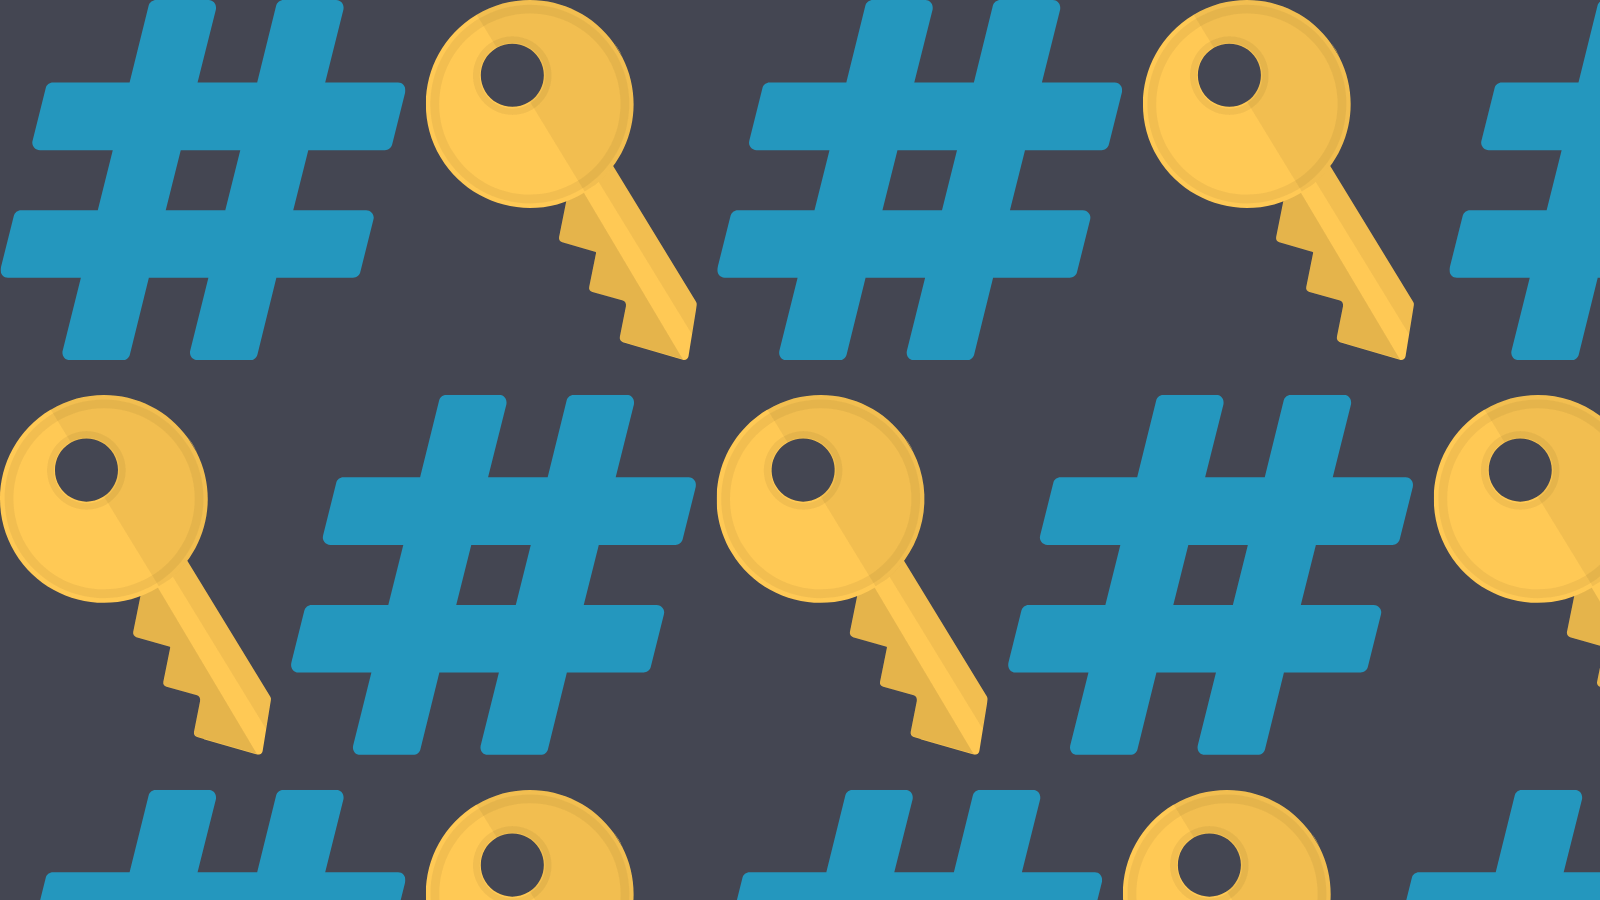 A hashtag and a key in an alternating pattern